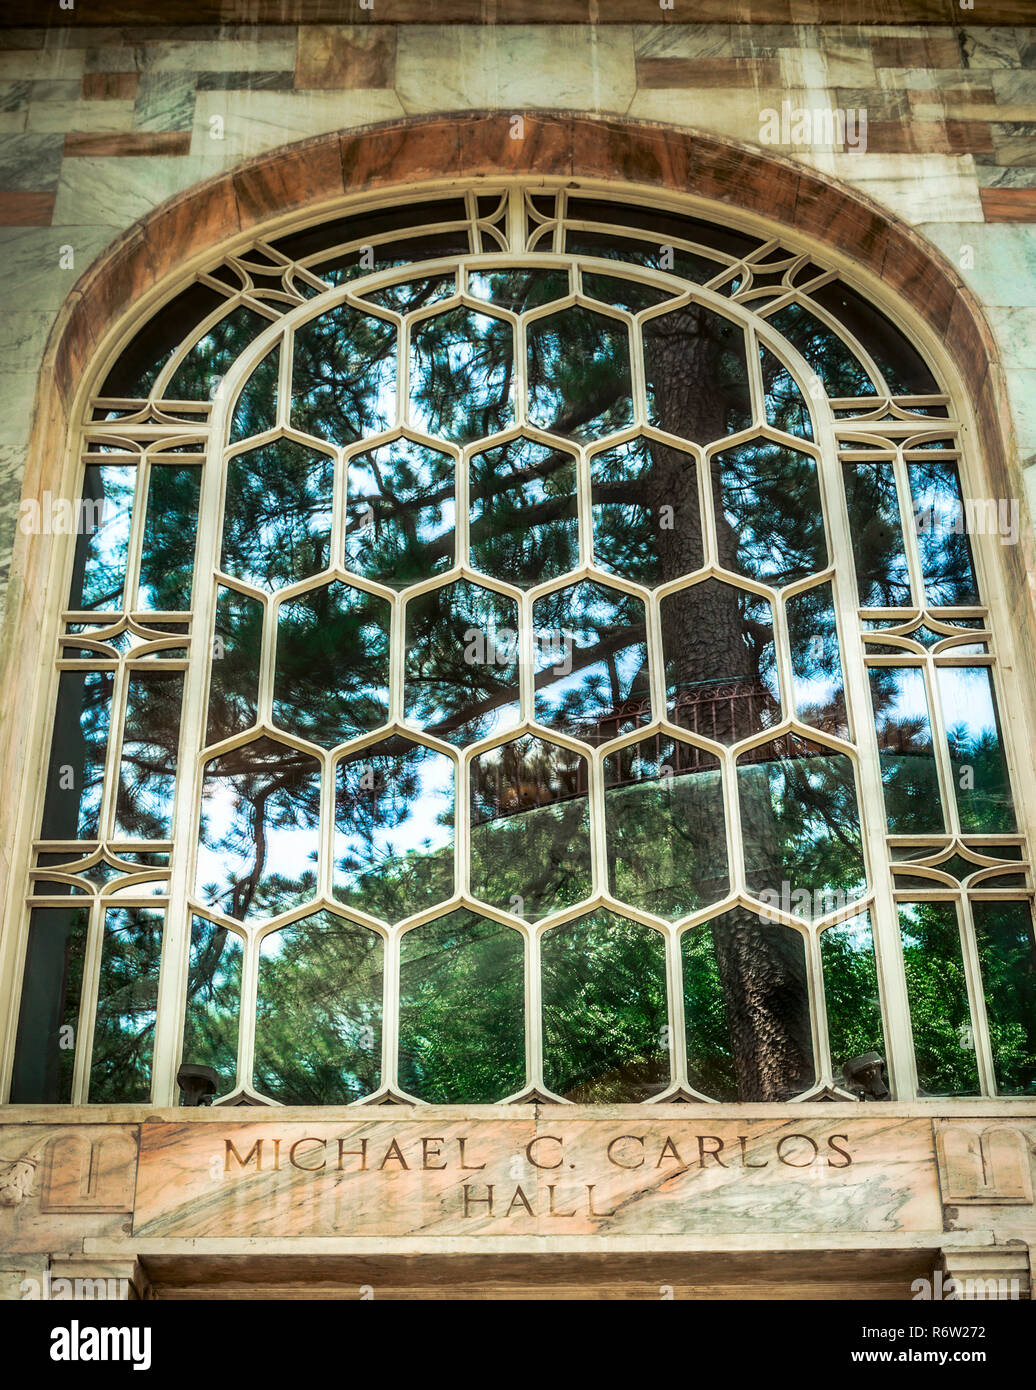 A window is pictured at Emory University, July 8, 2014, in Atlanta, Georgia. The 1916 building is built in the Beaux Arts style. Stock Photo